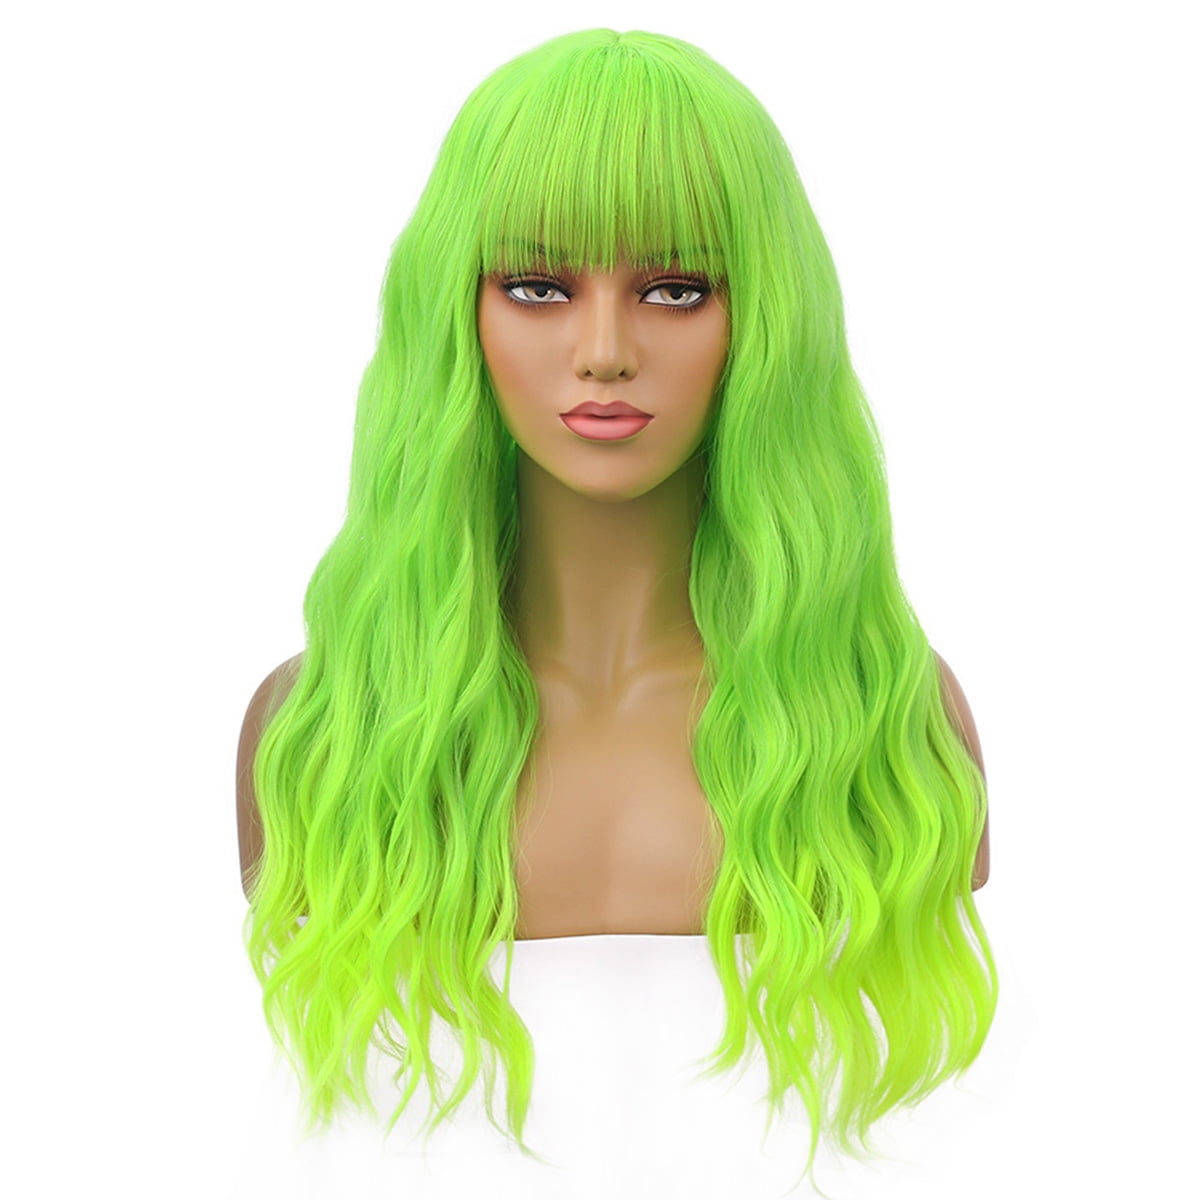 23" Green Wig Long Curly Wig with Bangs Women Girls Light Green Wigs Synthetic Wig with Wig Cap - Walmart.com